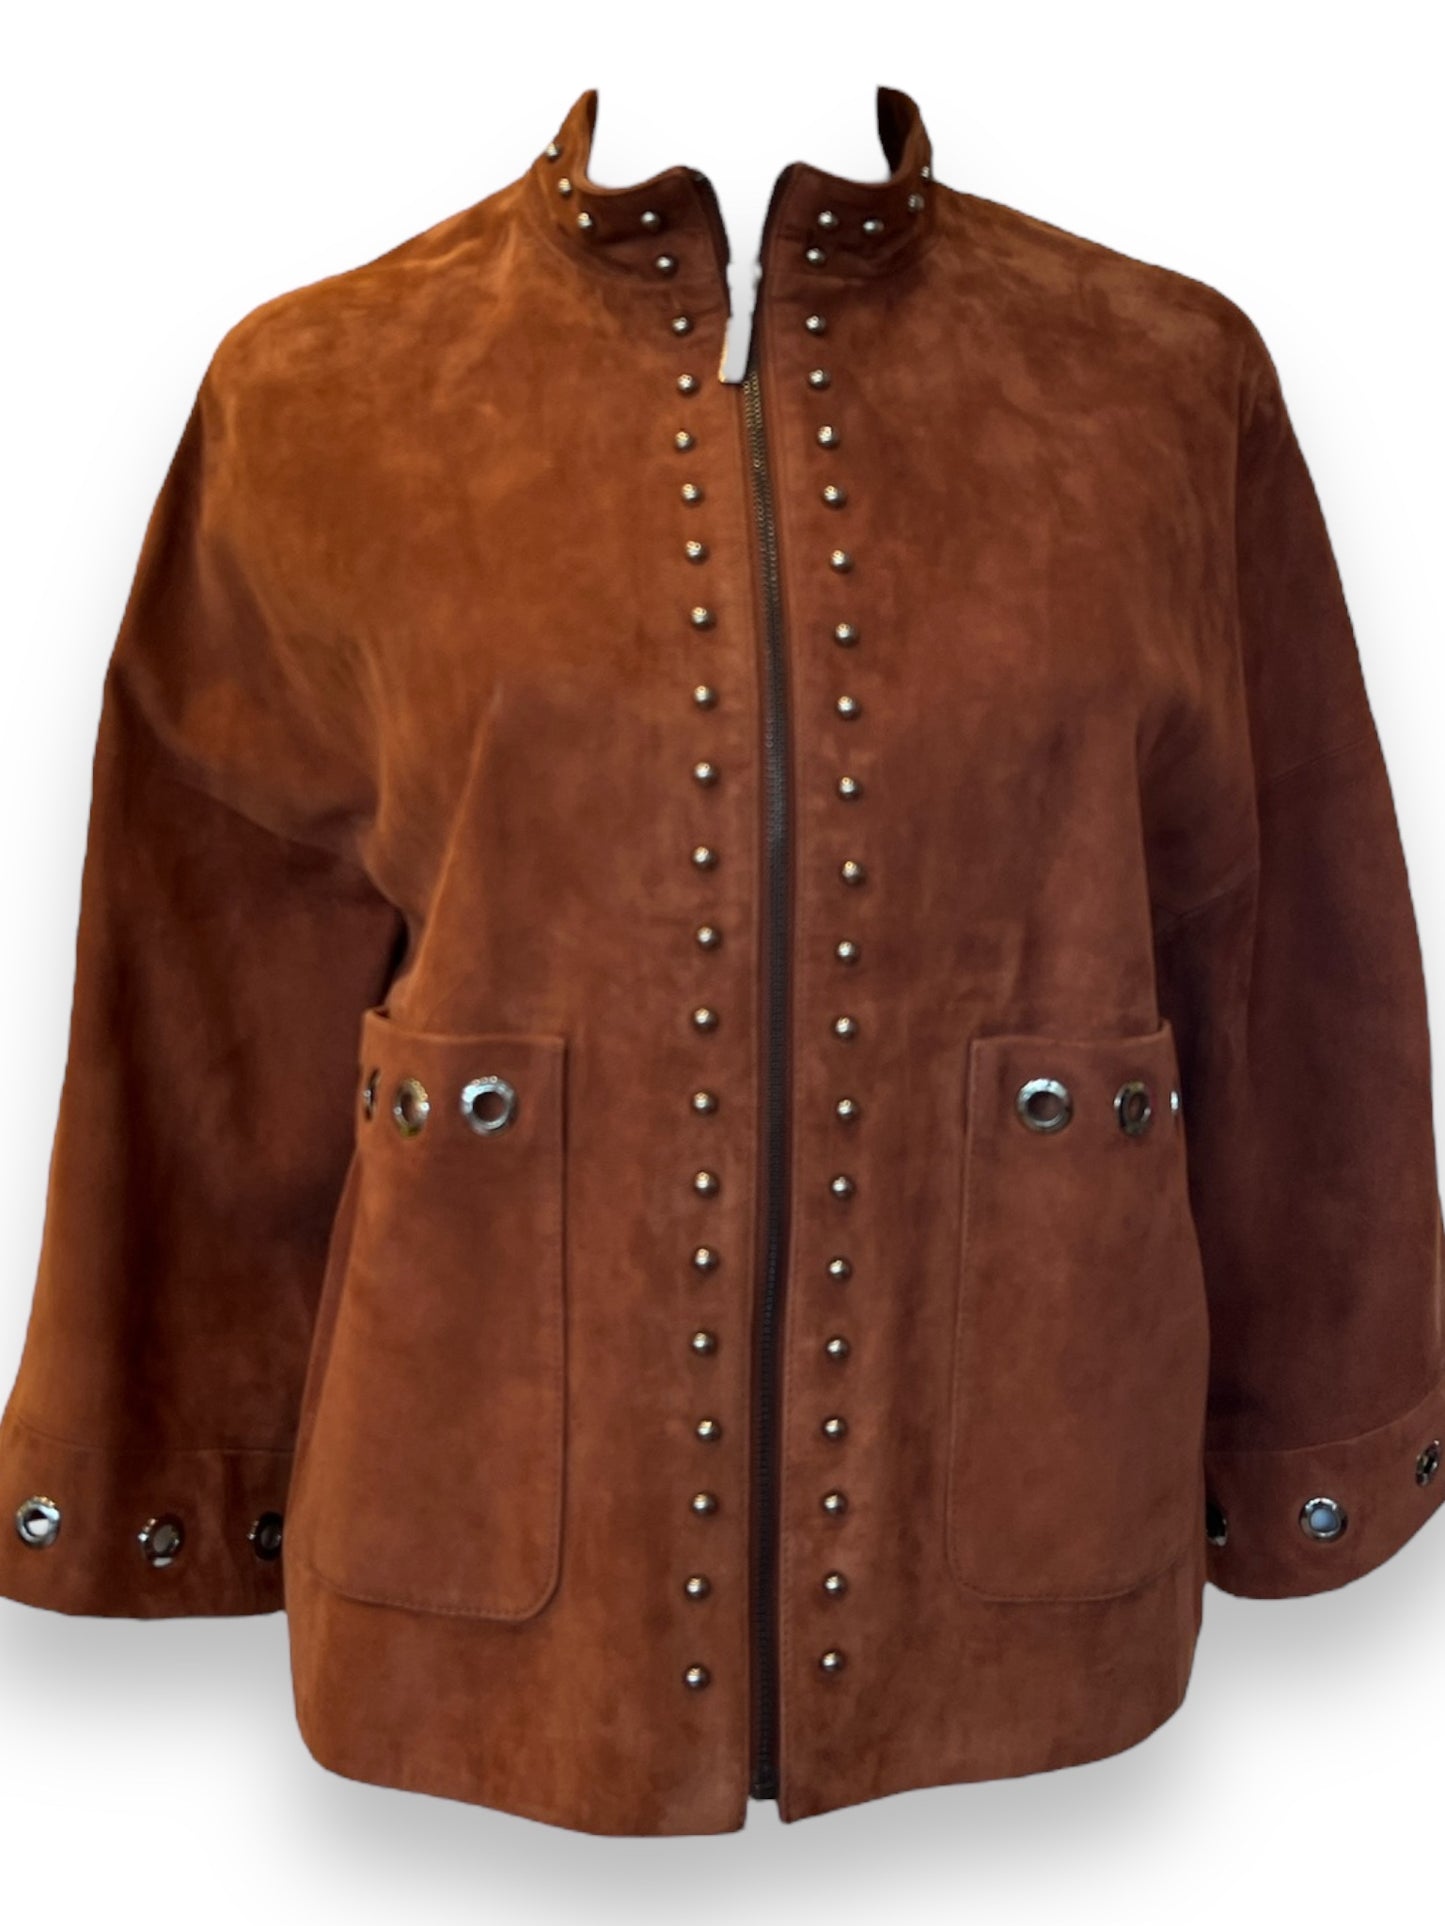 Short Brown Suede Jacket with Pockets